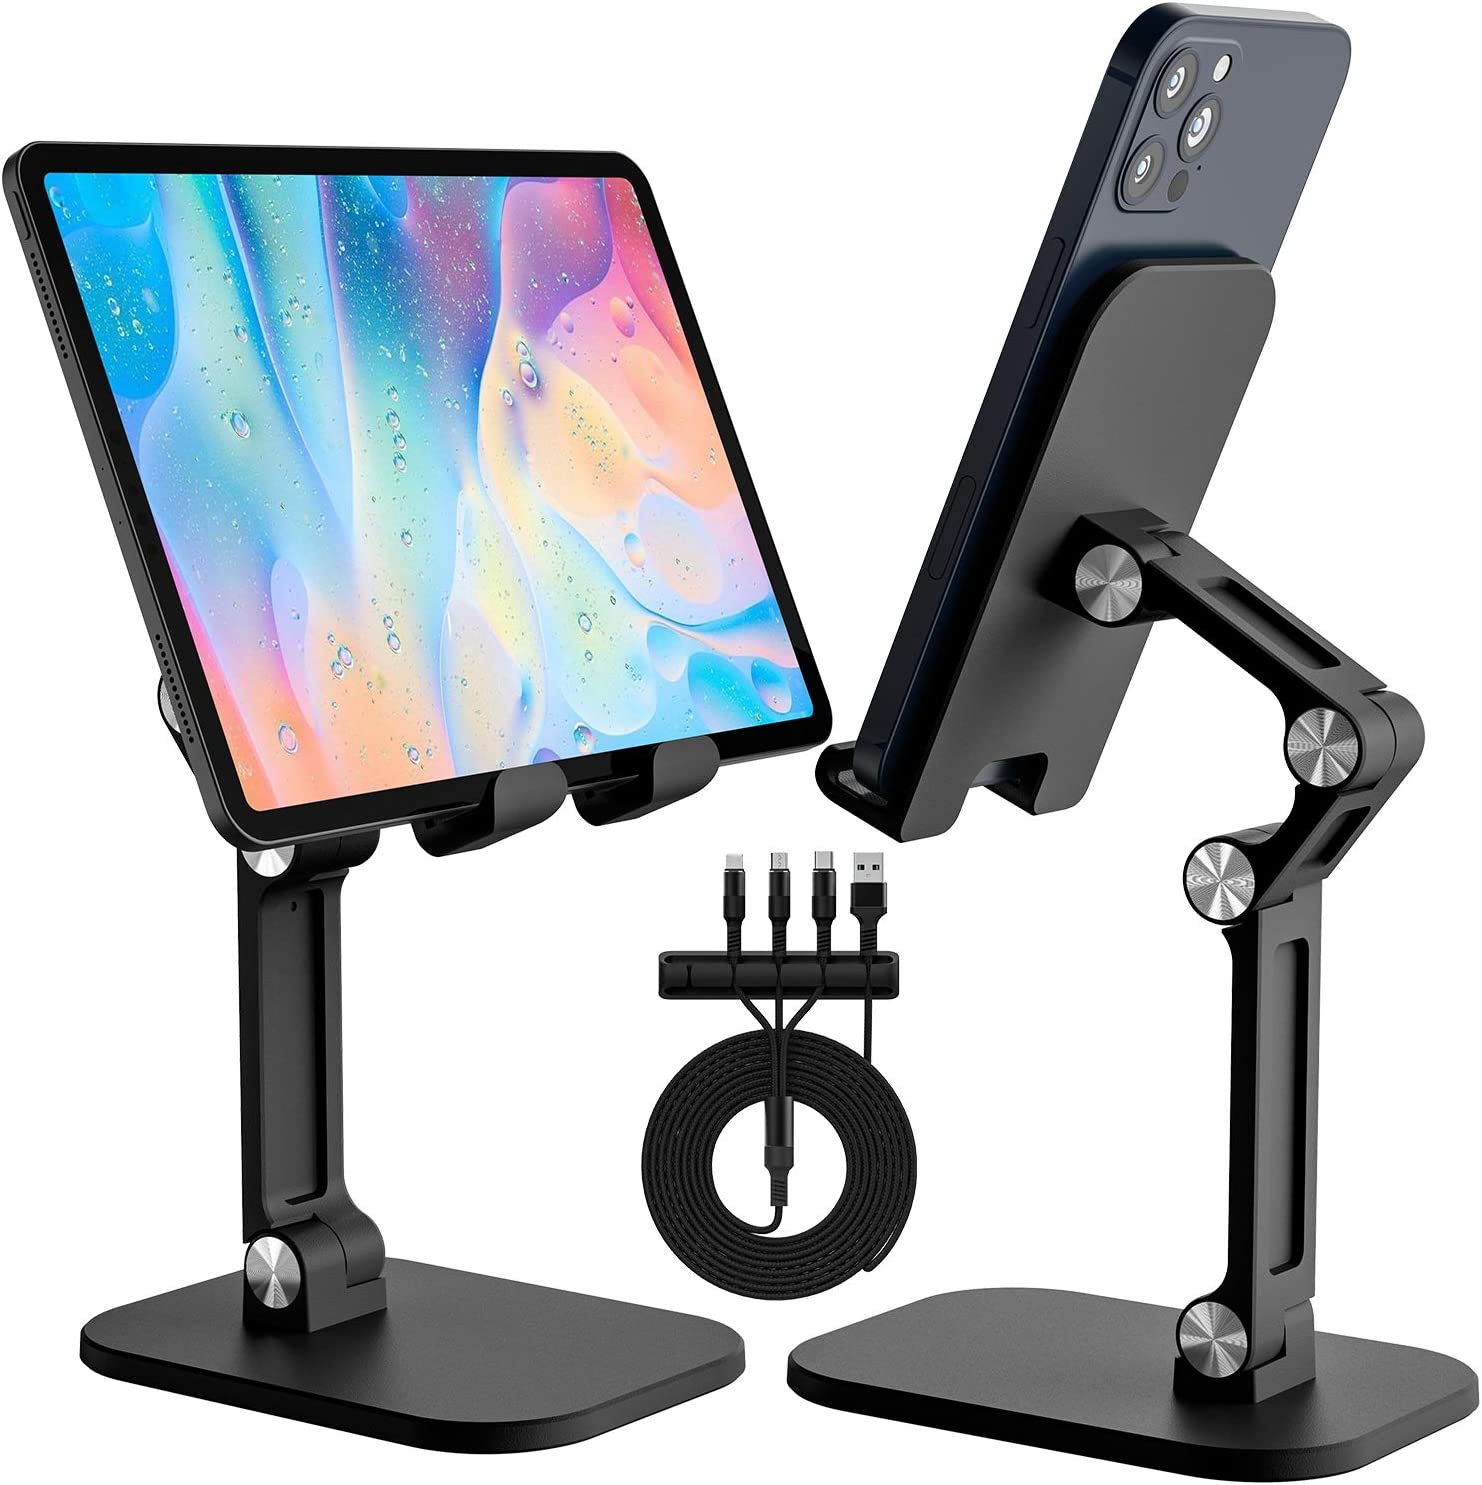 Amazon Prime Members: Cvida Phone & Tablet Height / Angle Adjustable Desk Stand / Holder w/ 5A 3-in-1 Charging Cable & Cable Organizer: Black $4.95 & More + FS w/ Prime or on $25+